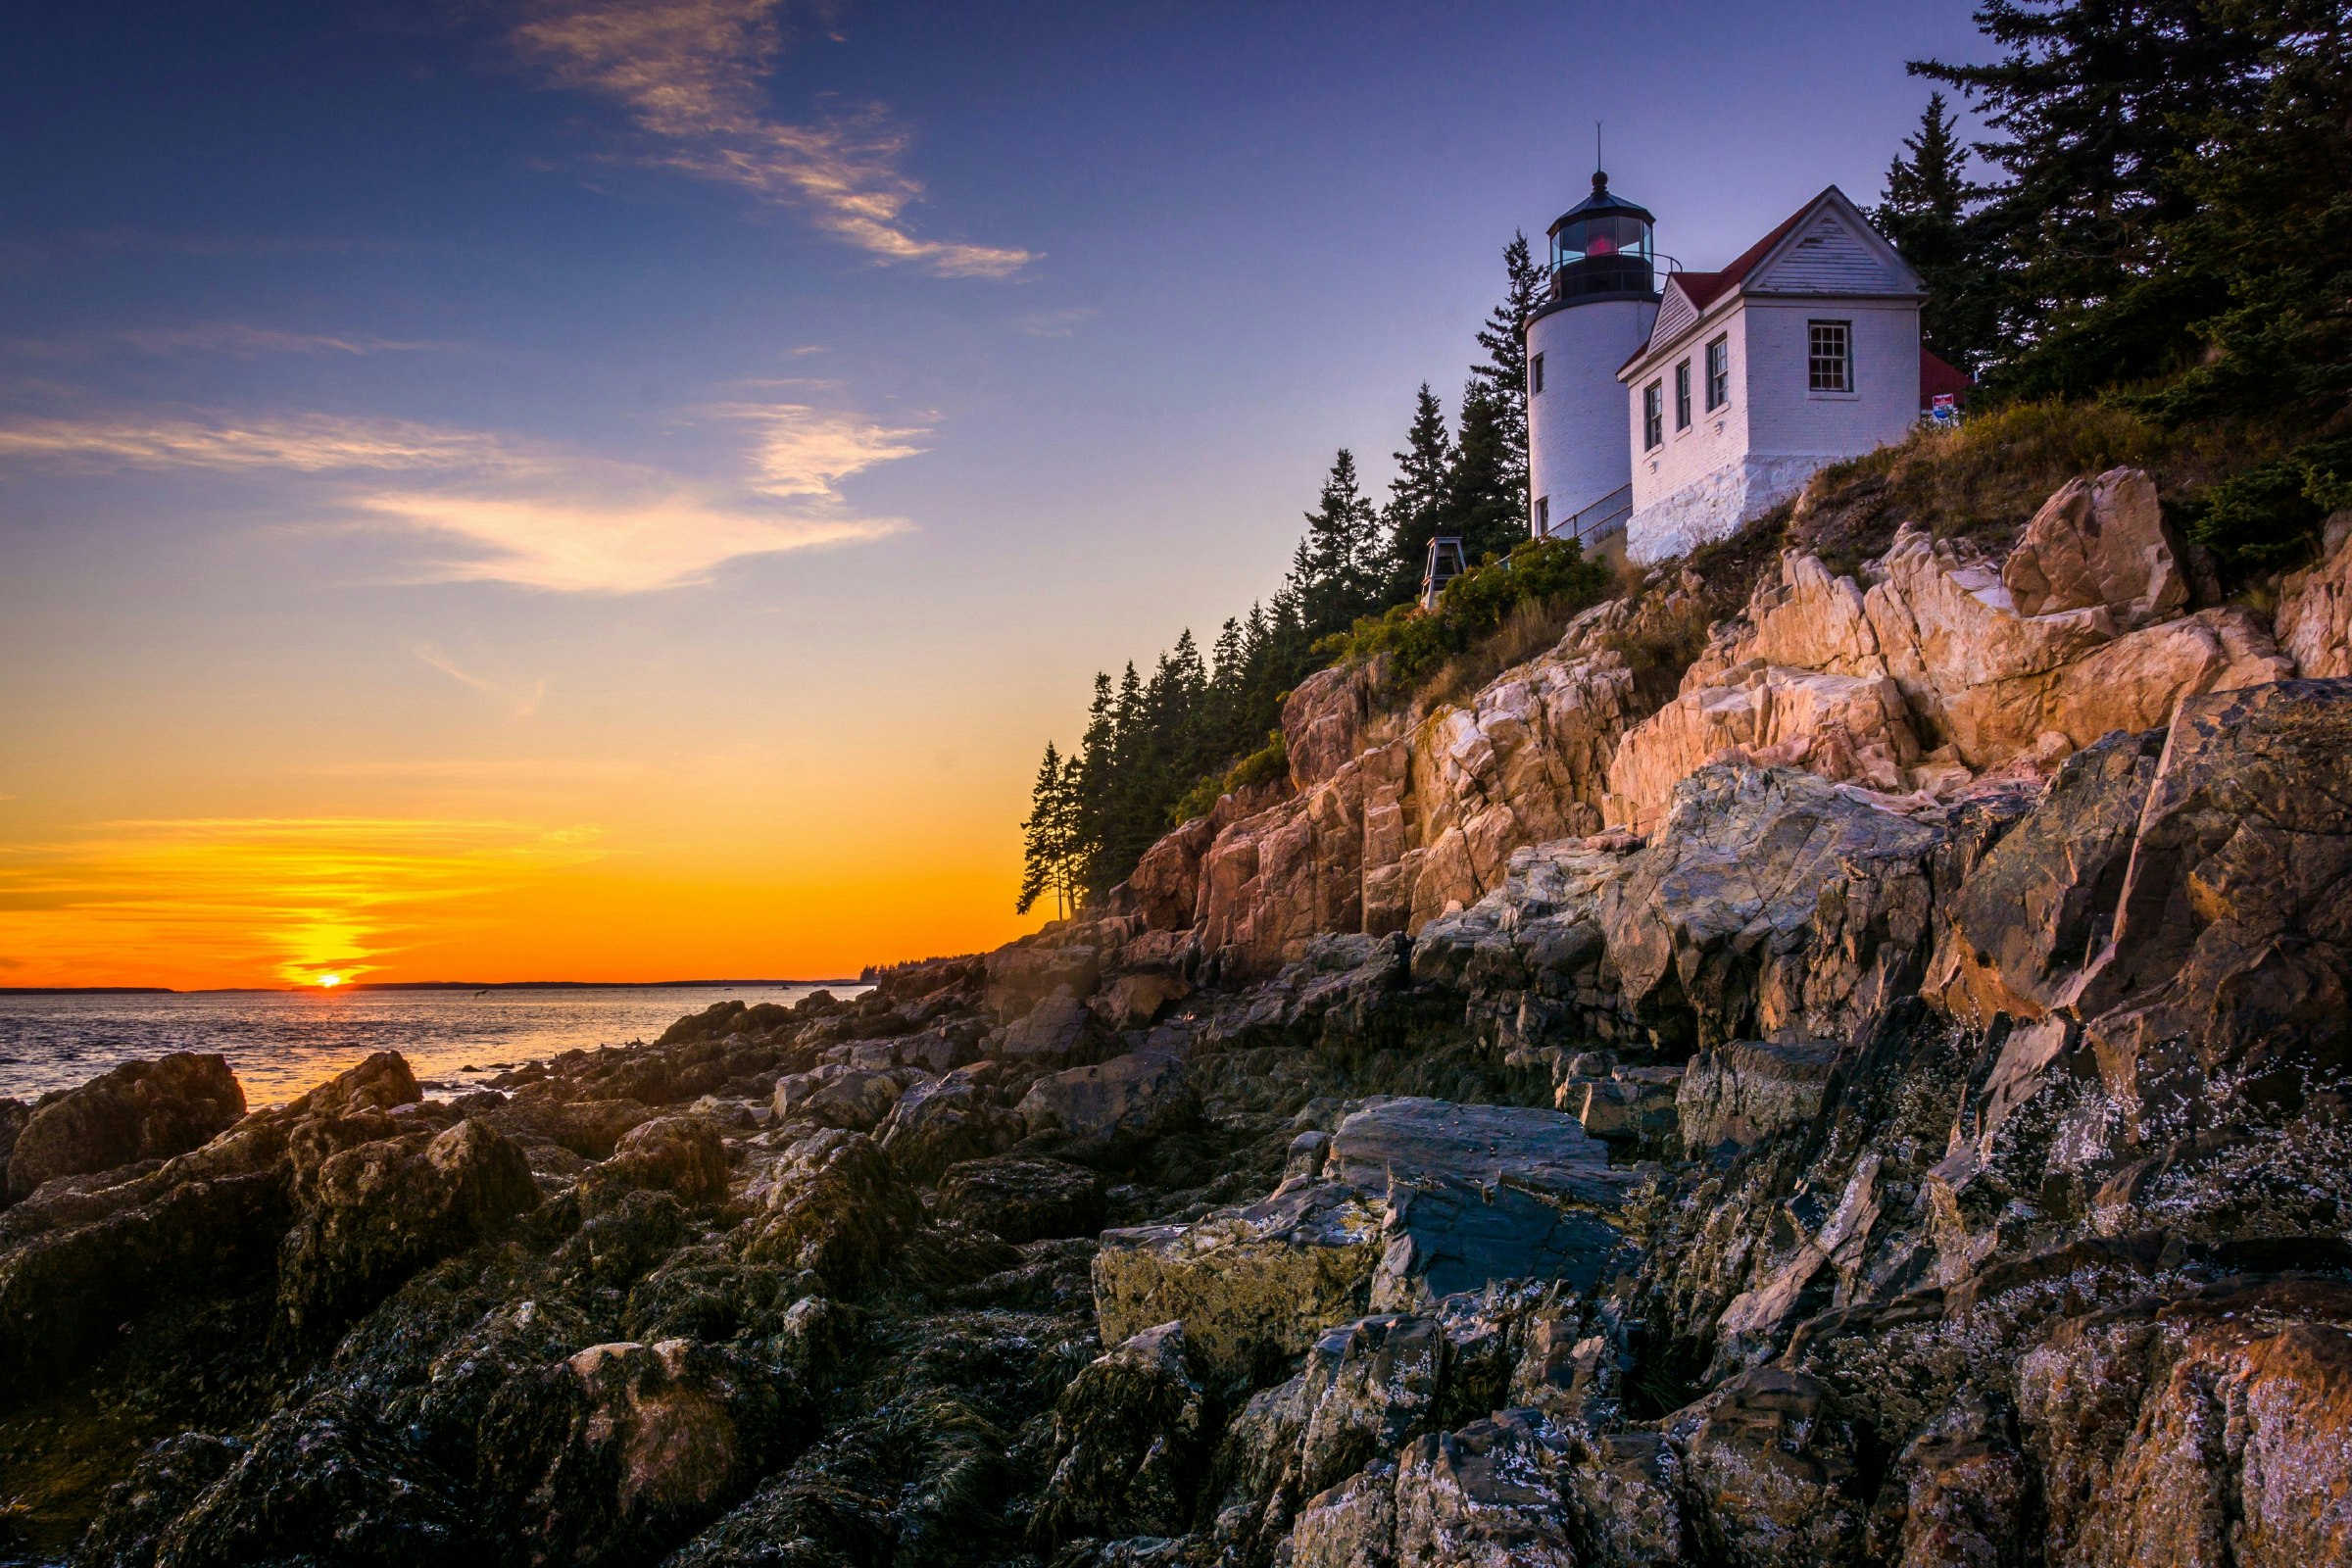 Bass Harbor Lighthouse at sunset, in Acadia National Park, Maine .